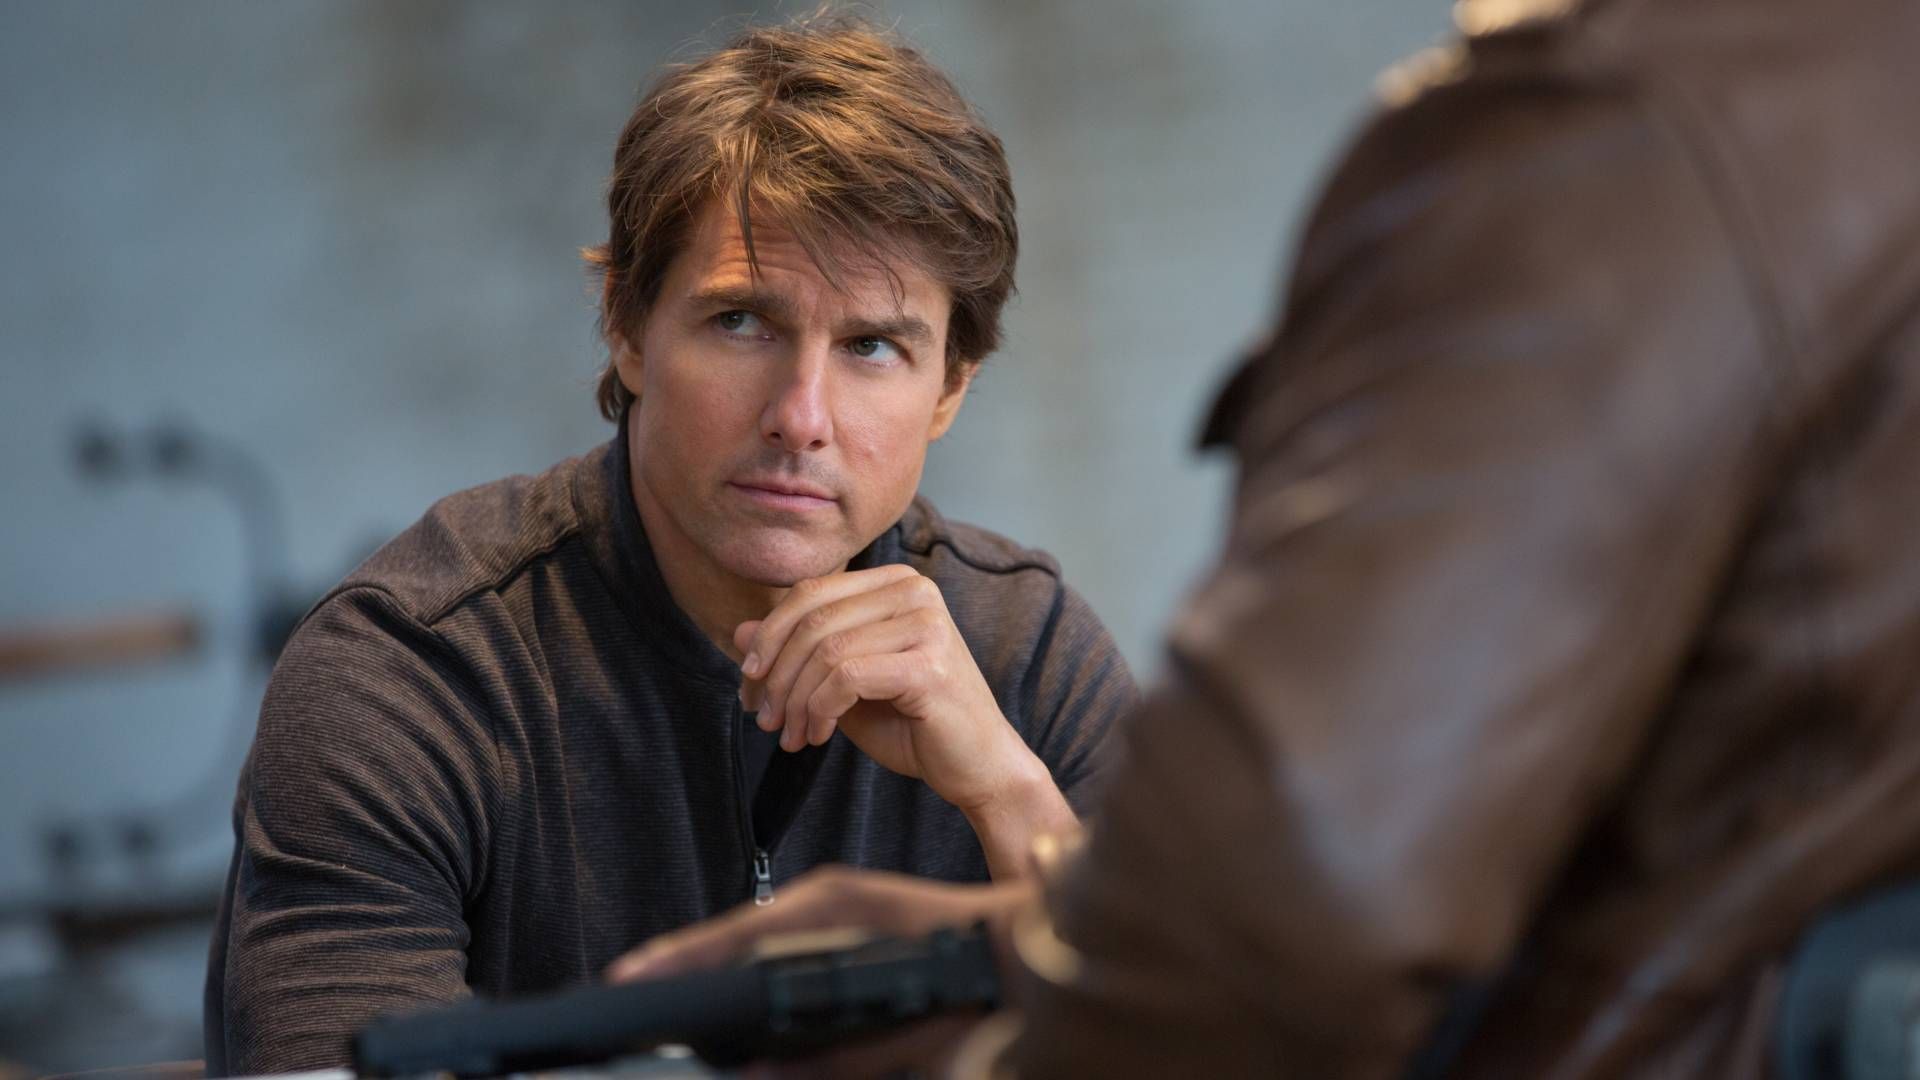 <p>                     Whether he’s scaling a building or producing Oscar-nominated performances, there’s no denying that Tom Cruise is a Hollywood legend. It’s been that way since his early work in Risky Business and Top Gun cemented him as a leading man, before his performance as everyone’s favorite IMF agent in the Mission: Impossible movies confirmed him as the go-to action man.                   </p>                                      <p>                     Born in Syracuse, New York, Cruise first started acting at the age of 18, landing bit parts in Endless Love and Taps before making it big time in The Outsiders. Over the years since, he’s broken countless box office records for his leading roles, as well as earning his fair share of acting accolades from his peers. It doesn’t matter what the movie is, if Cruise is making an appearance, it’s sure to be memorable.                   </p>                                      <p>                     While he’s often known for his risky stunts that have seen him defying gravity and the laws of physics, there have also been countless powerful performances in his filmography too. As you might imagine with such a lengthy and impressive career, he's also had his fair share of iconic scenes as well. So in celebration of a Hollywood career like no other, here are some of the greatest Tom Cruise movie moments.                   </p>